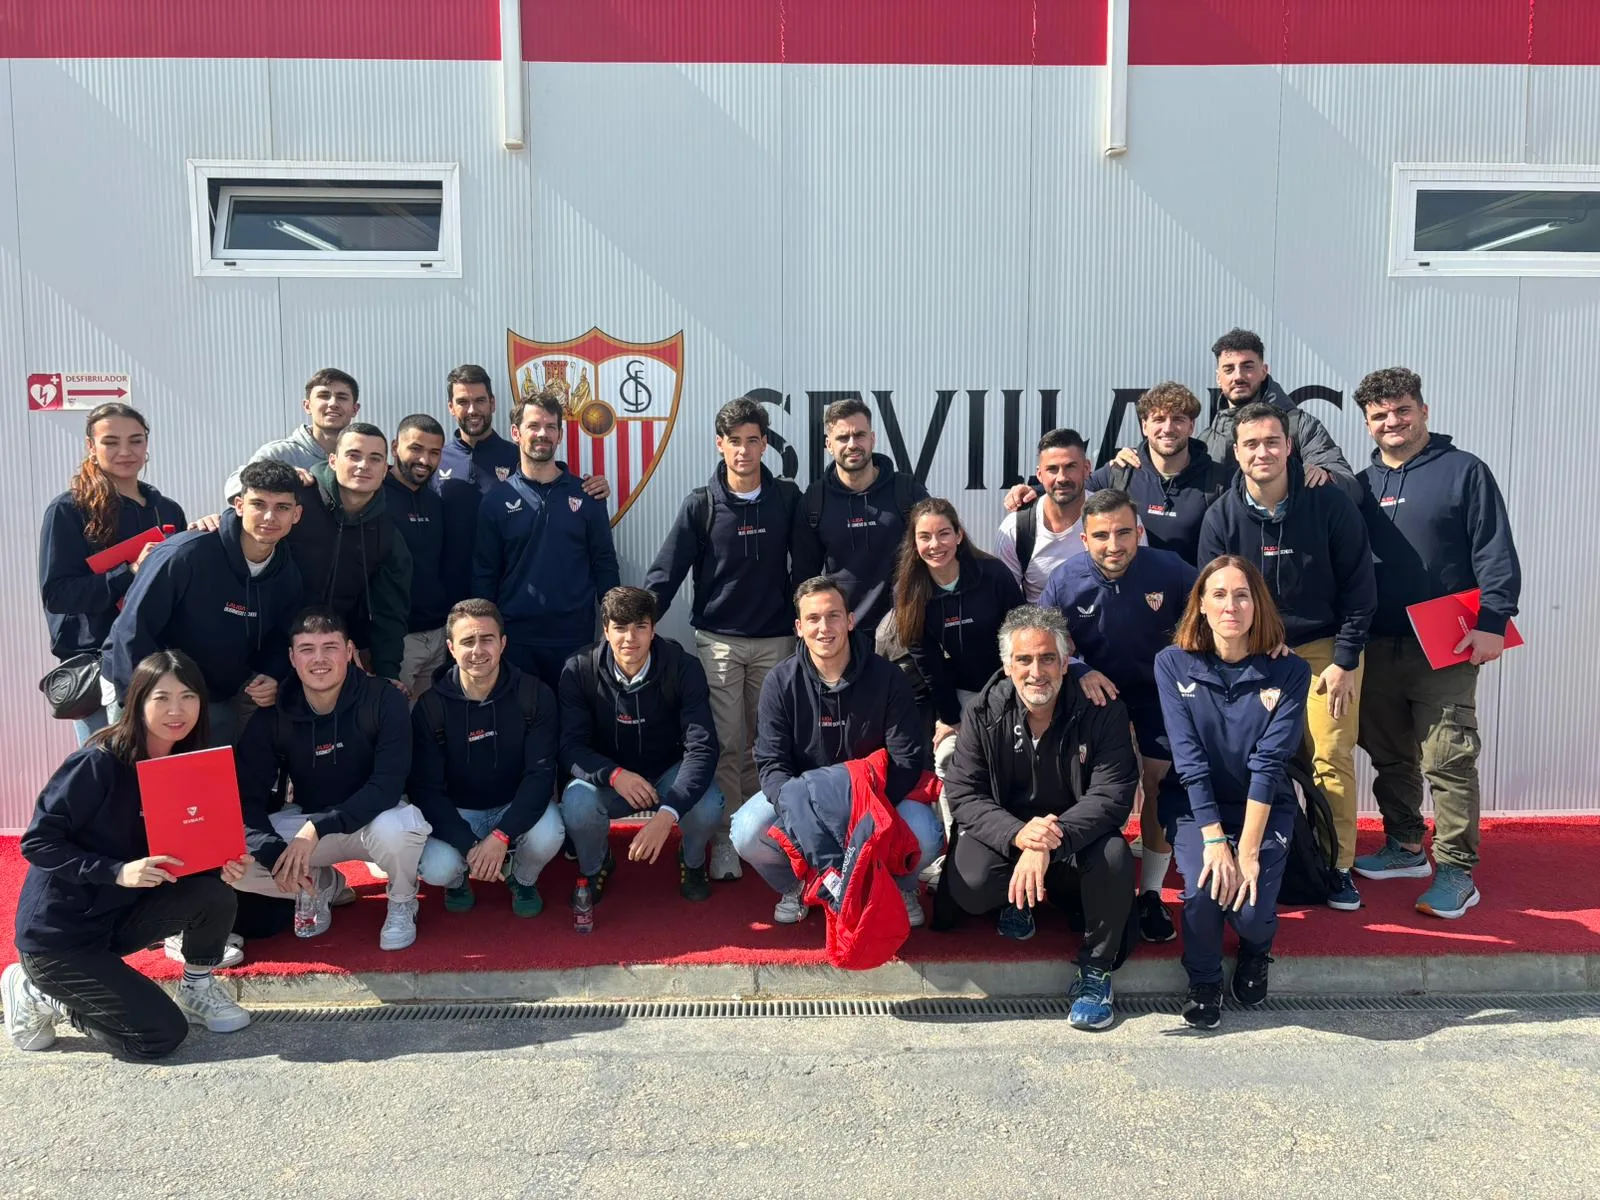 Training day at Sevilla FC facilities with students from LaLiga Business School